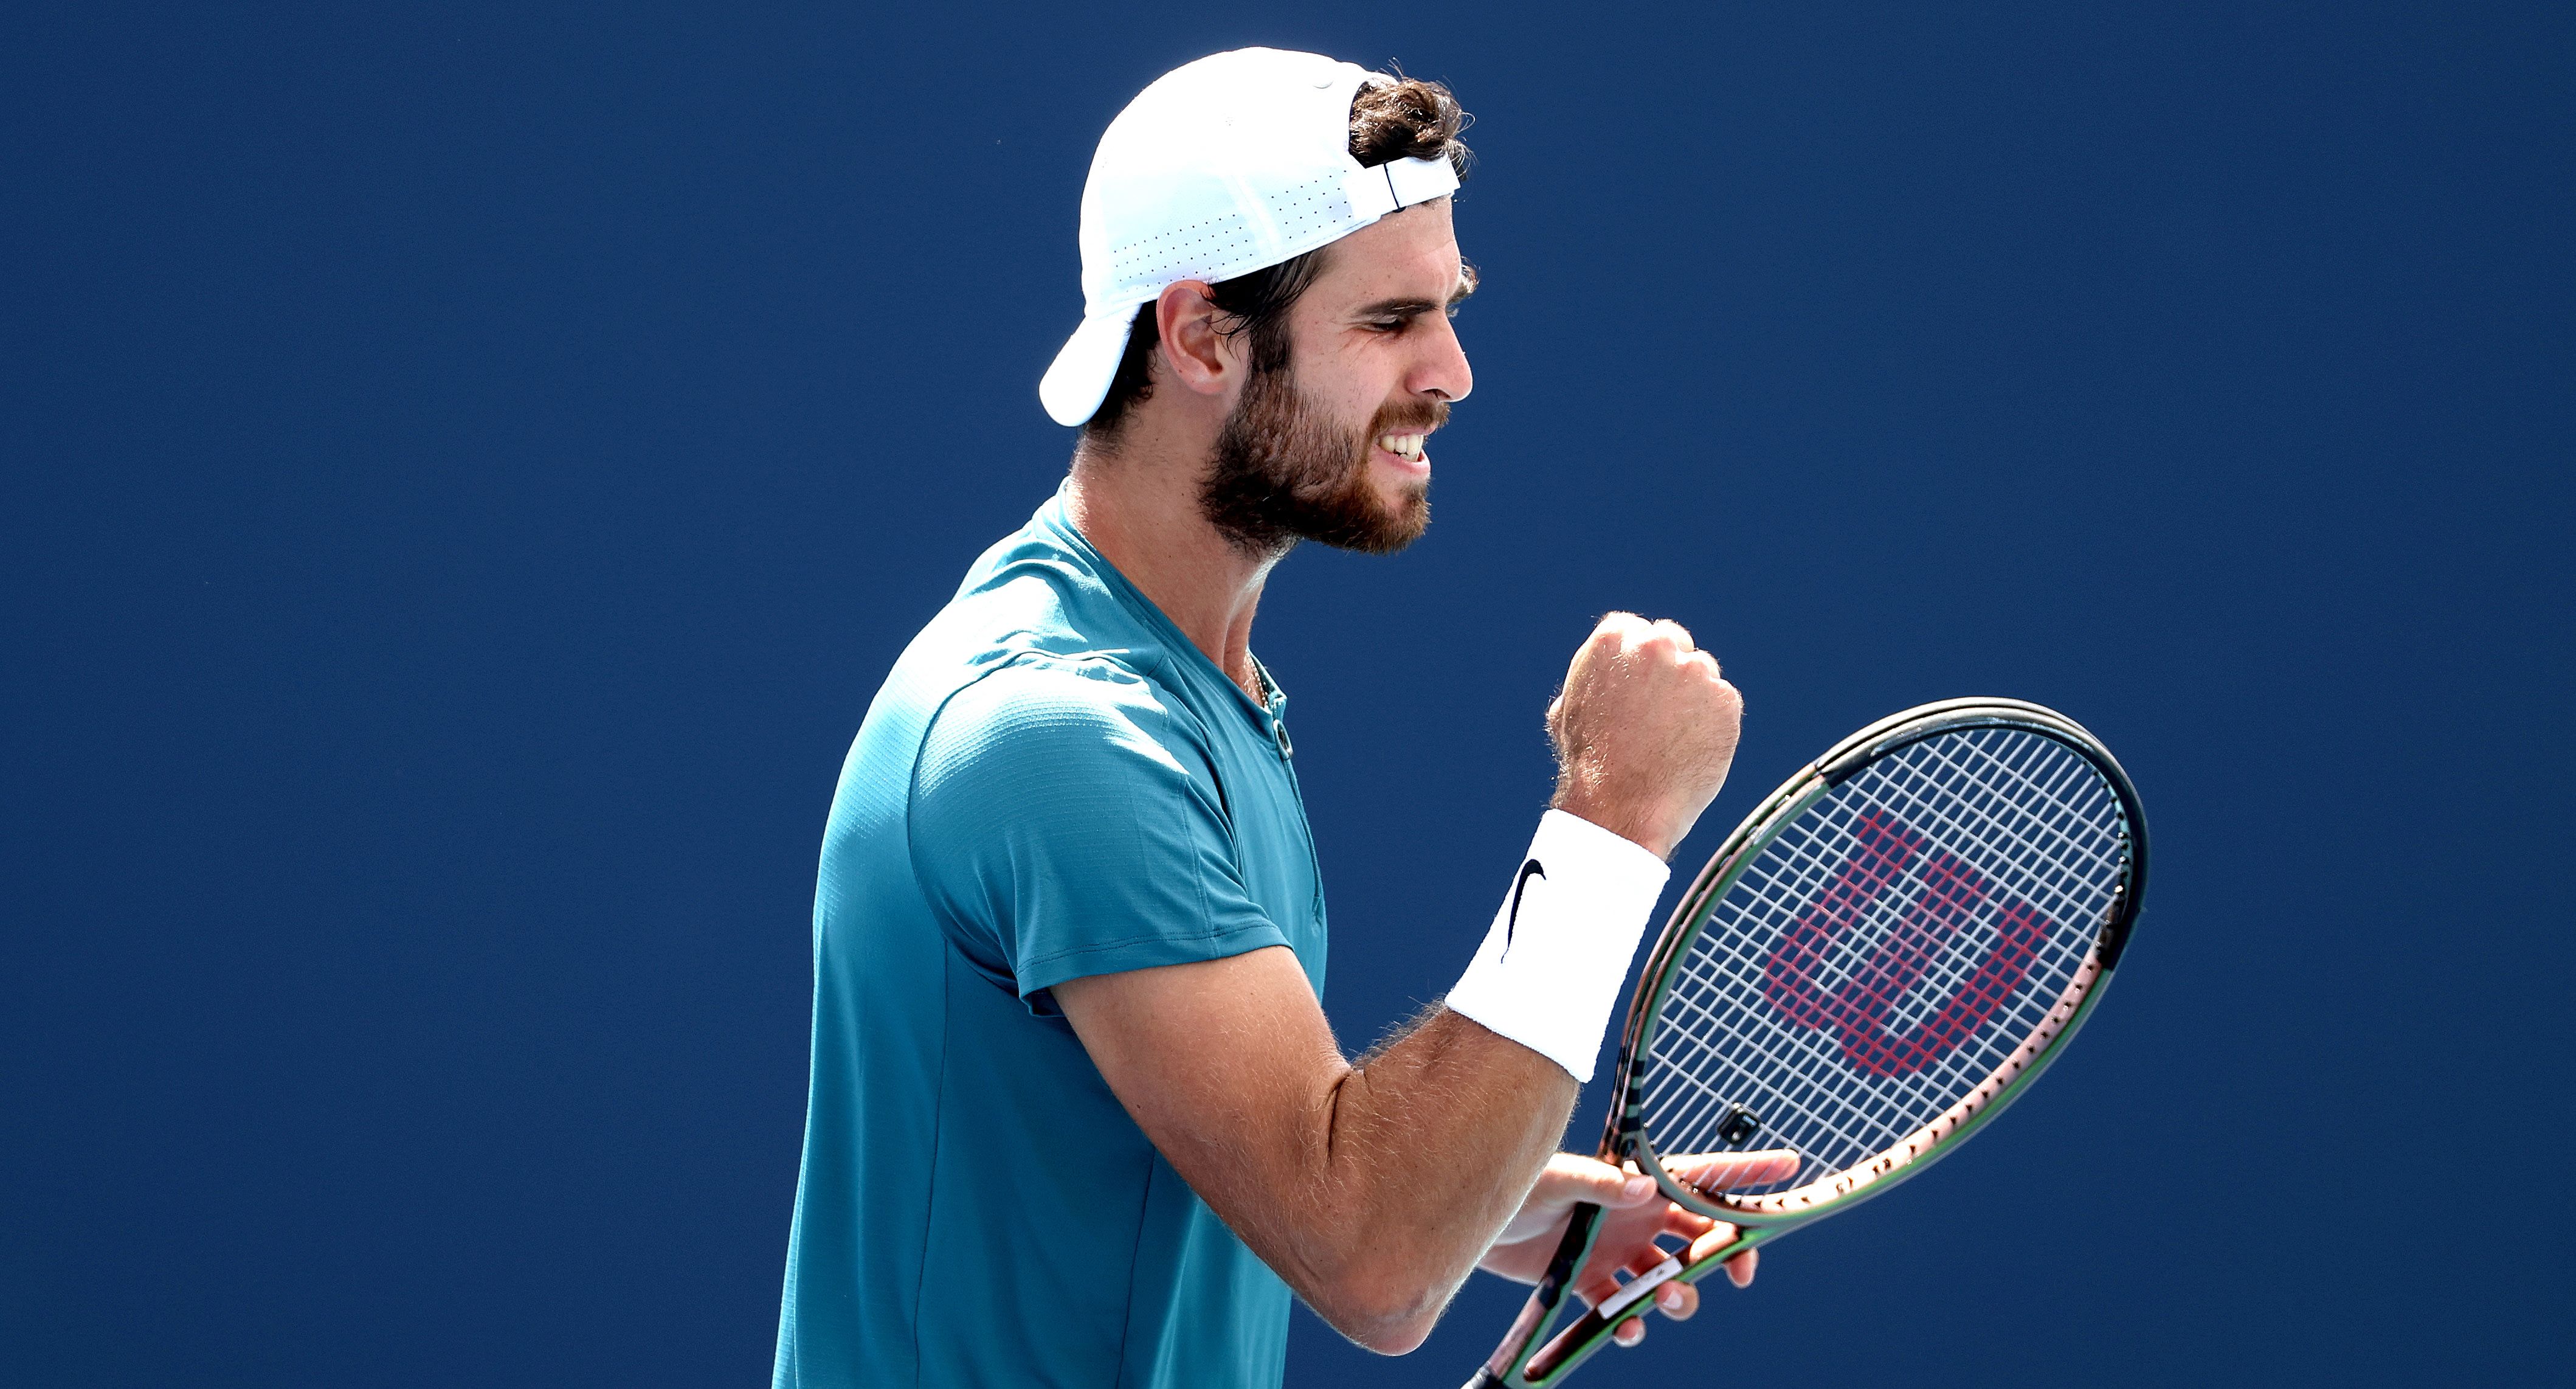 Stat of the Day Karen Khachanov snaps 23-match losing streak to Top 10 players with win over Tsitsipas in Miami